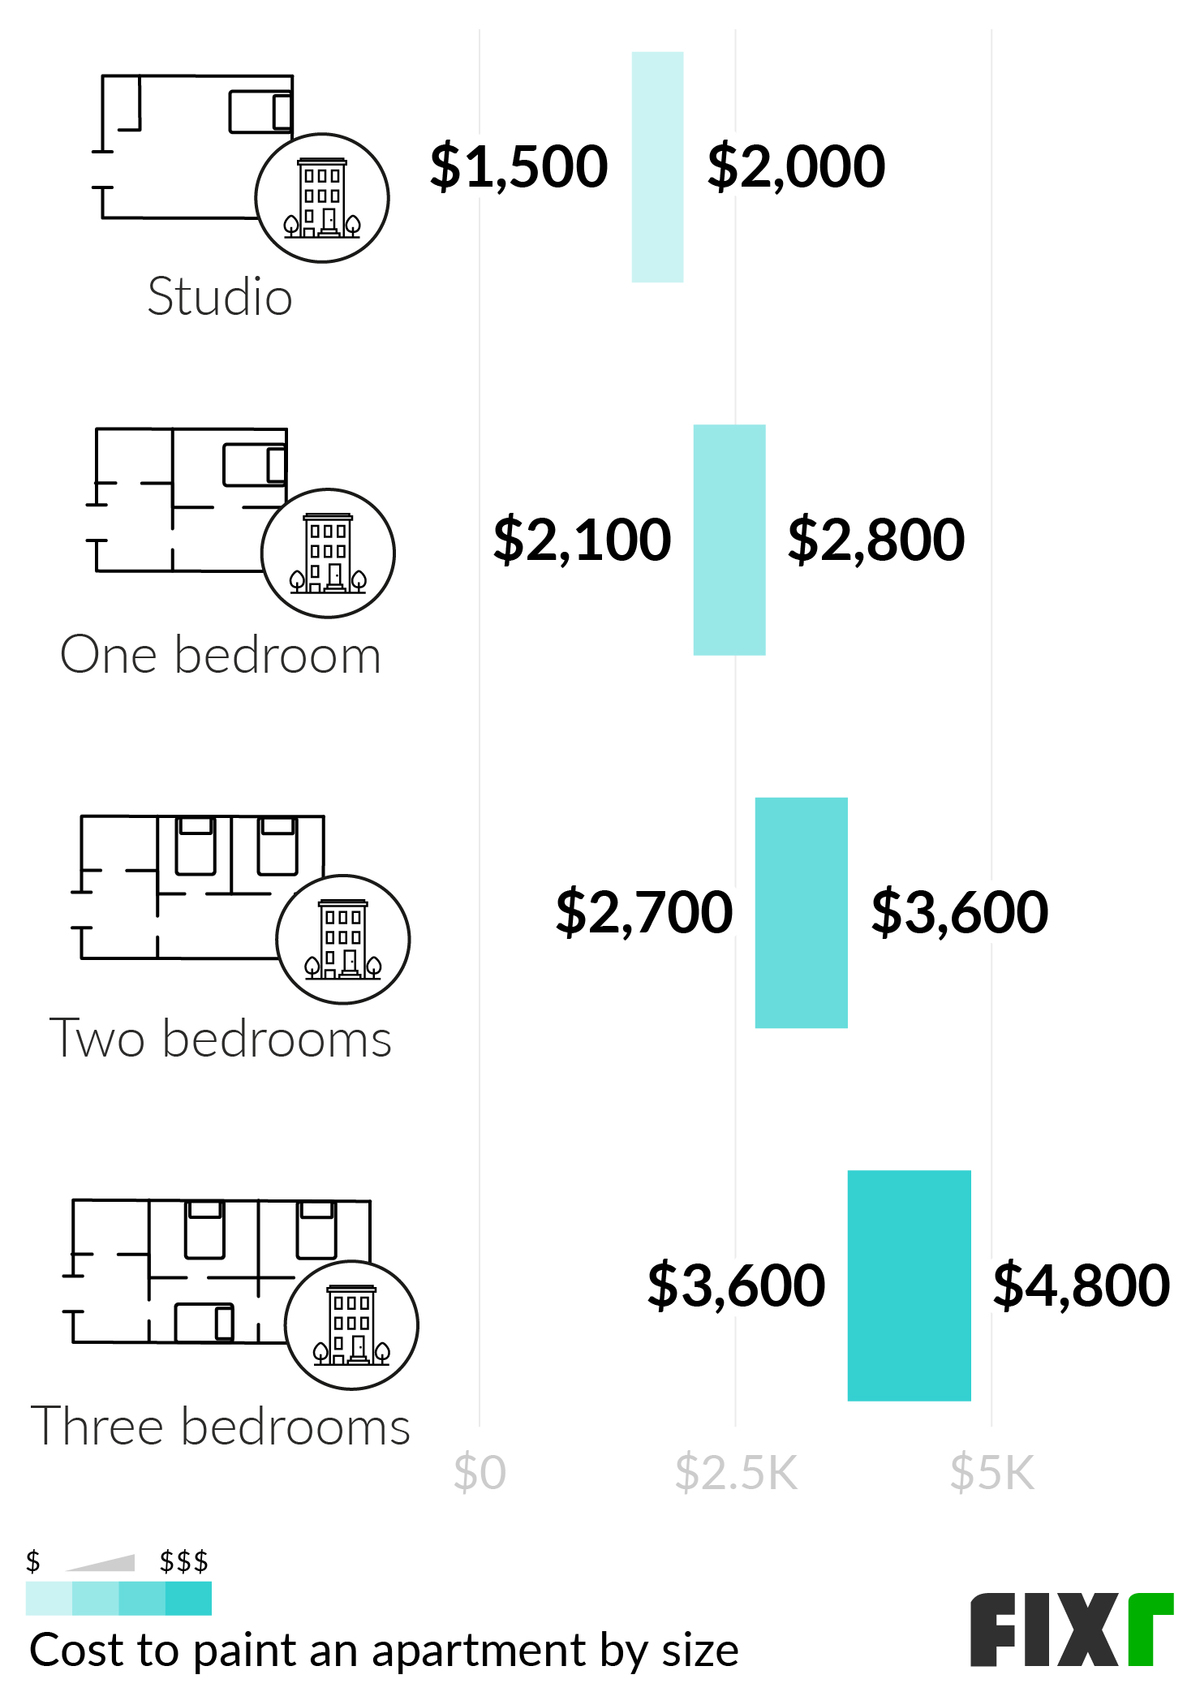 Cost to paint a studio, one-bedroom, two-bedroom, and three-bedroom apartment